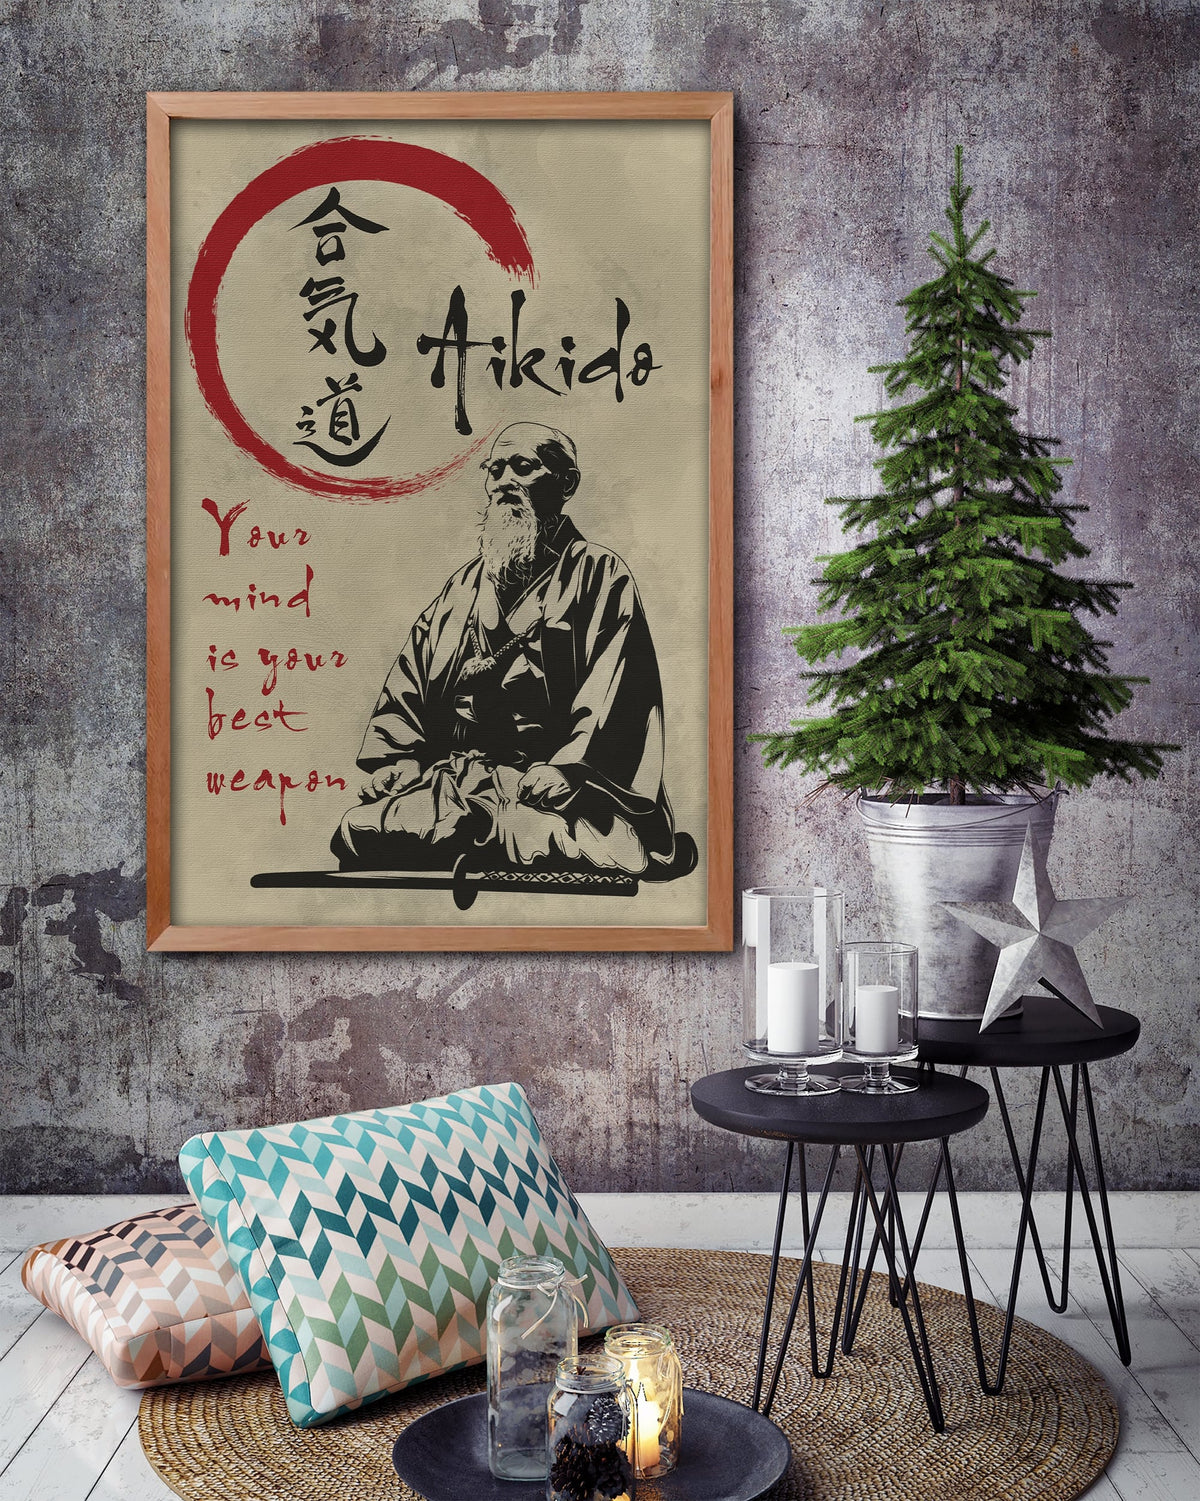 AI003 - Your Mind Is Your Best Weapon - Morihei Ueshiba - Vertical Poster - Vertical Canvas - Aikido Poster